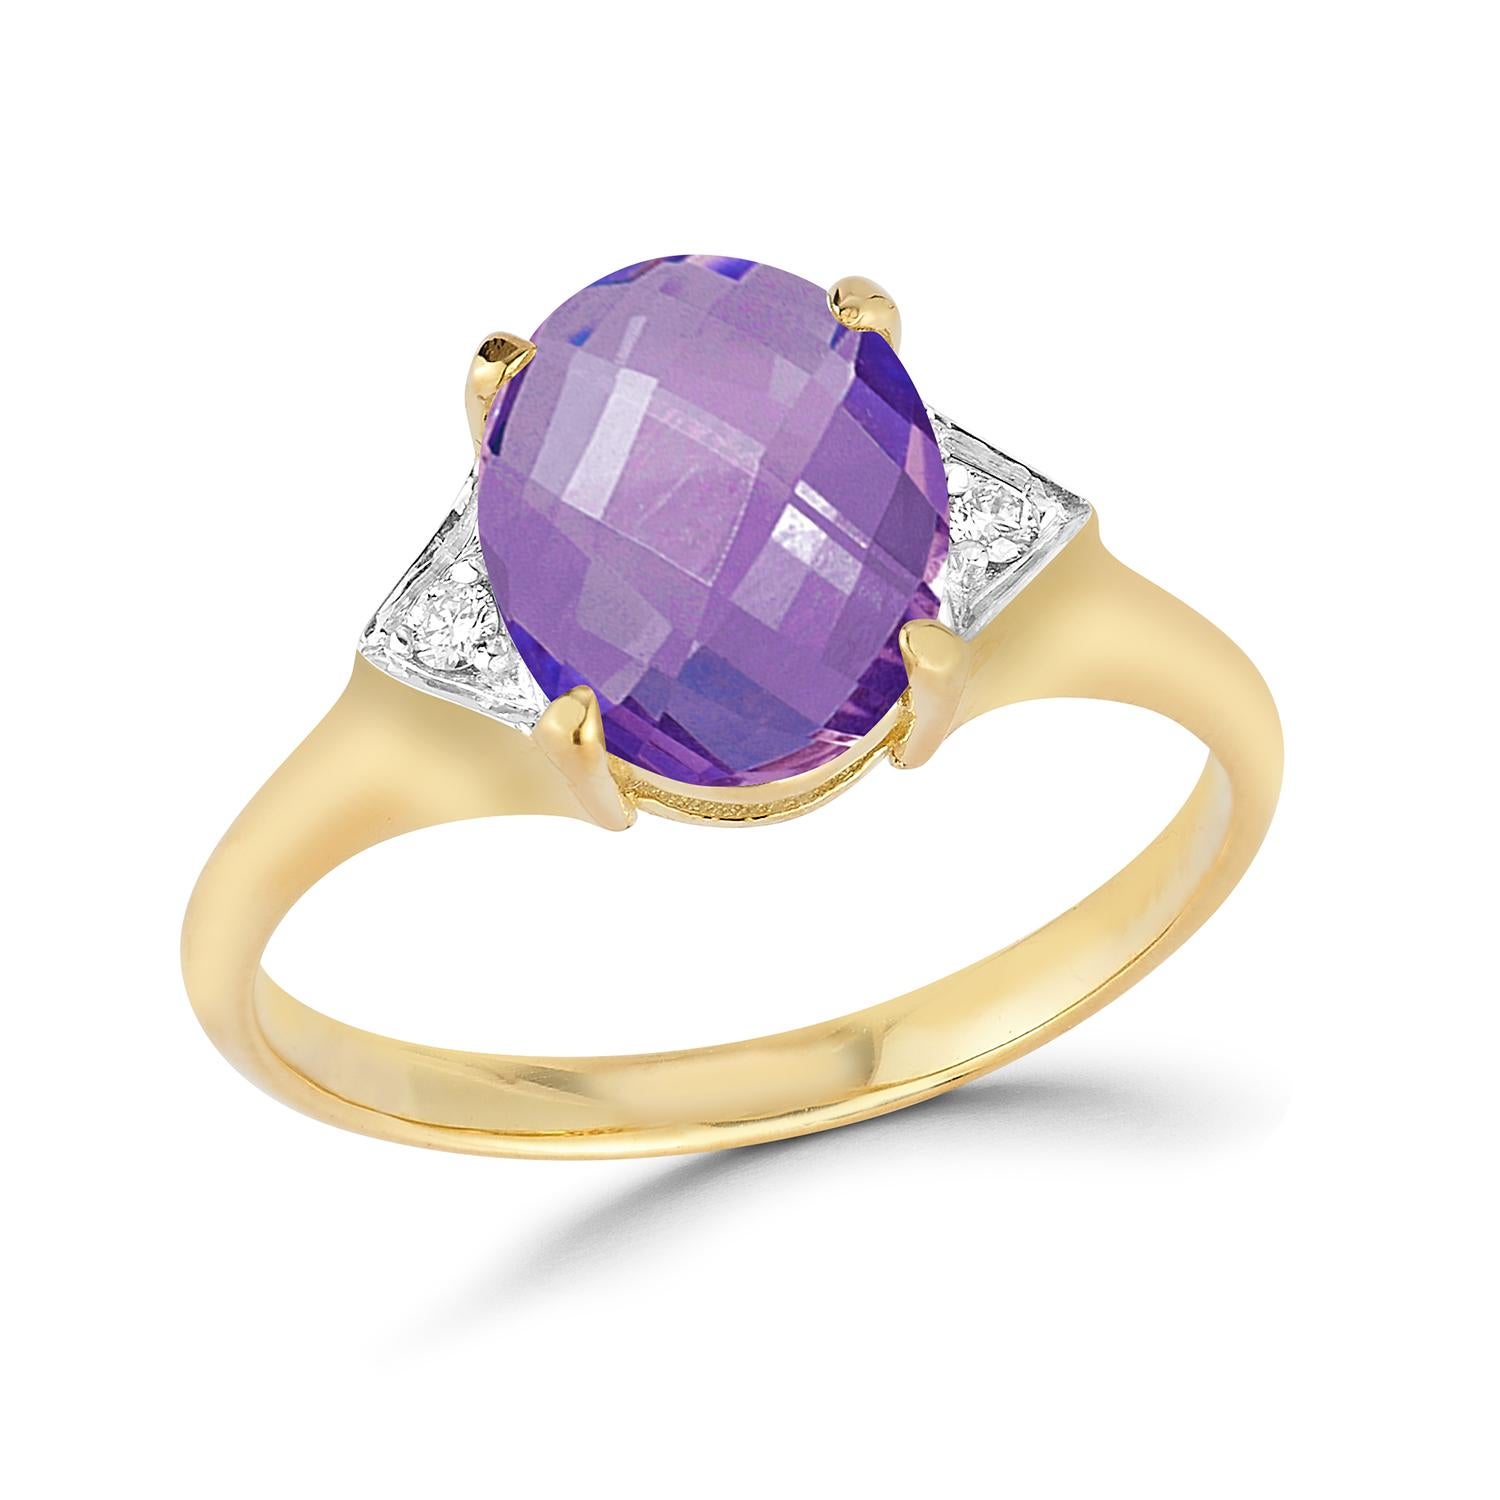 For Sale:  Hand-Crafted 14K Gold 0.05 ct. tw. Diamond & 5.35CT Amethyst Cocktail Ring 4